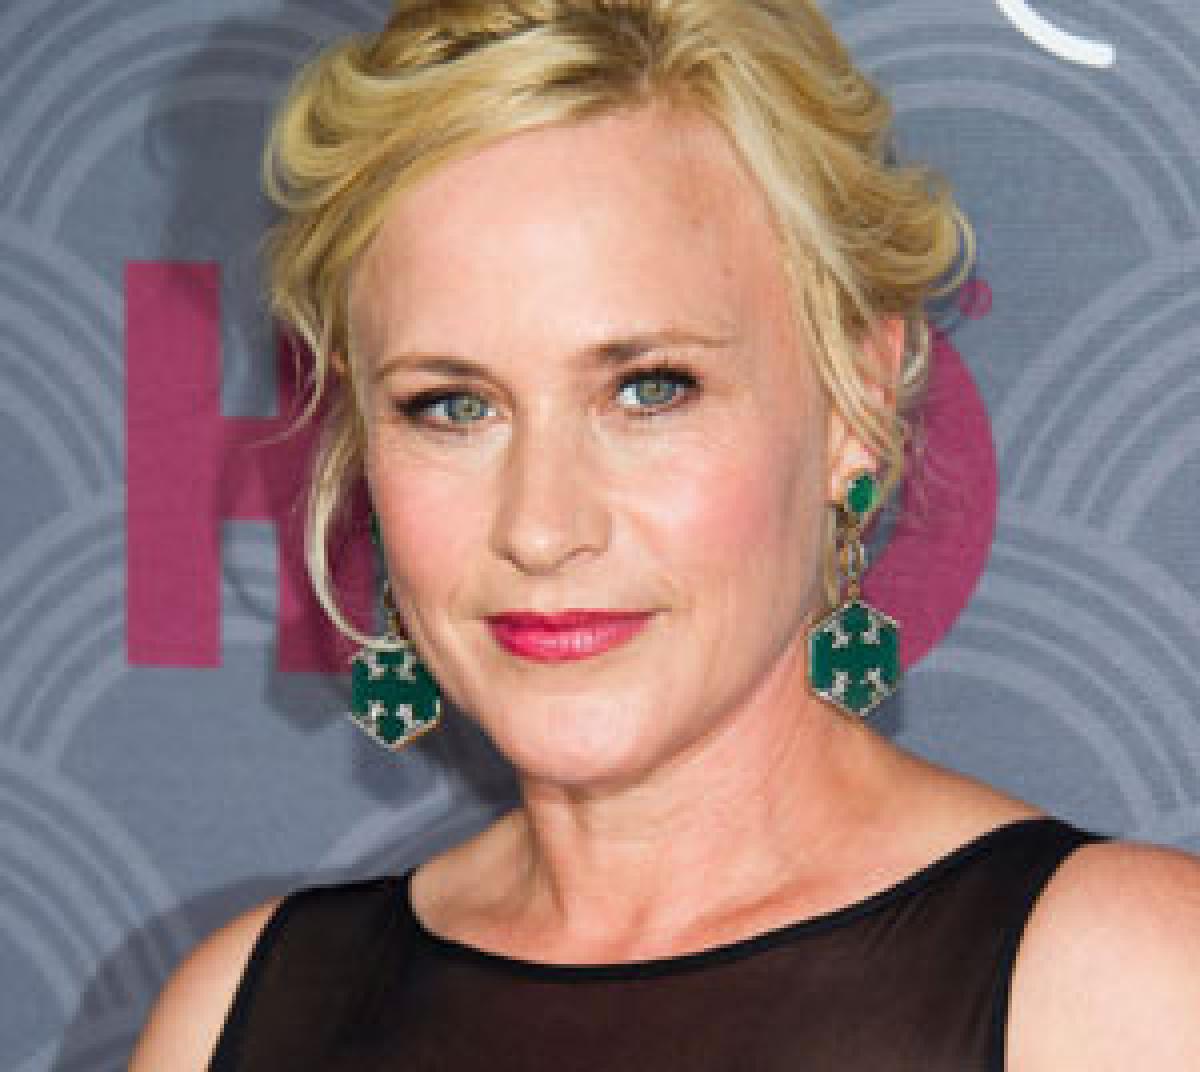 Patricia Arquette in talks to join Toy Story 4 voice cast